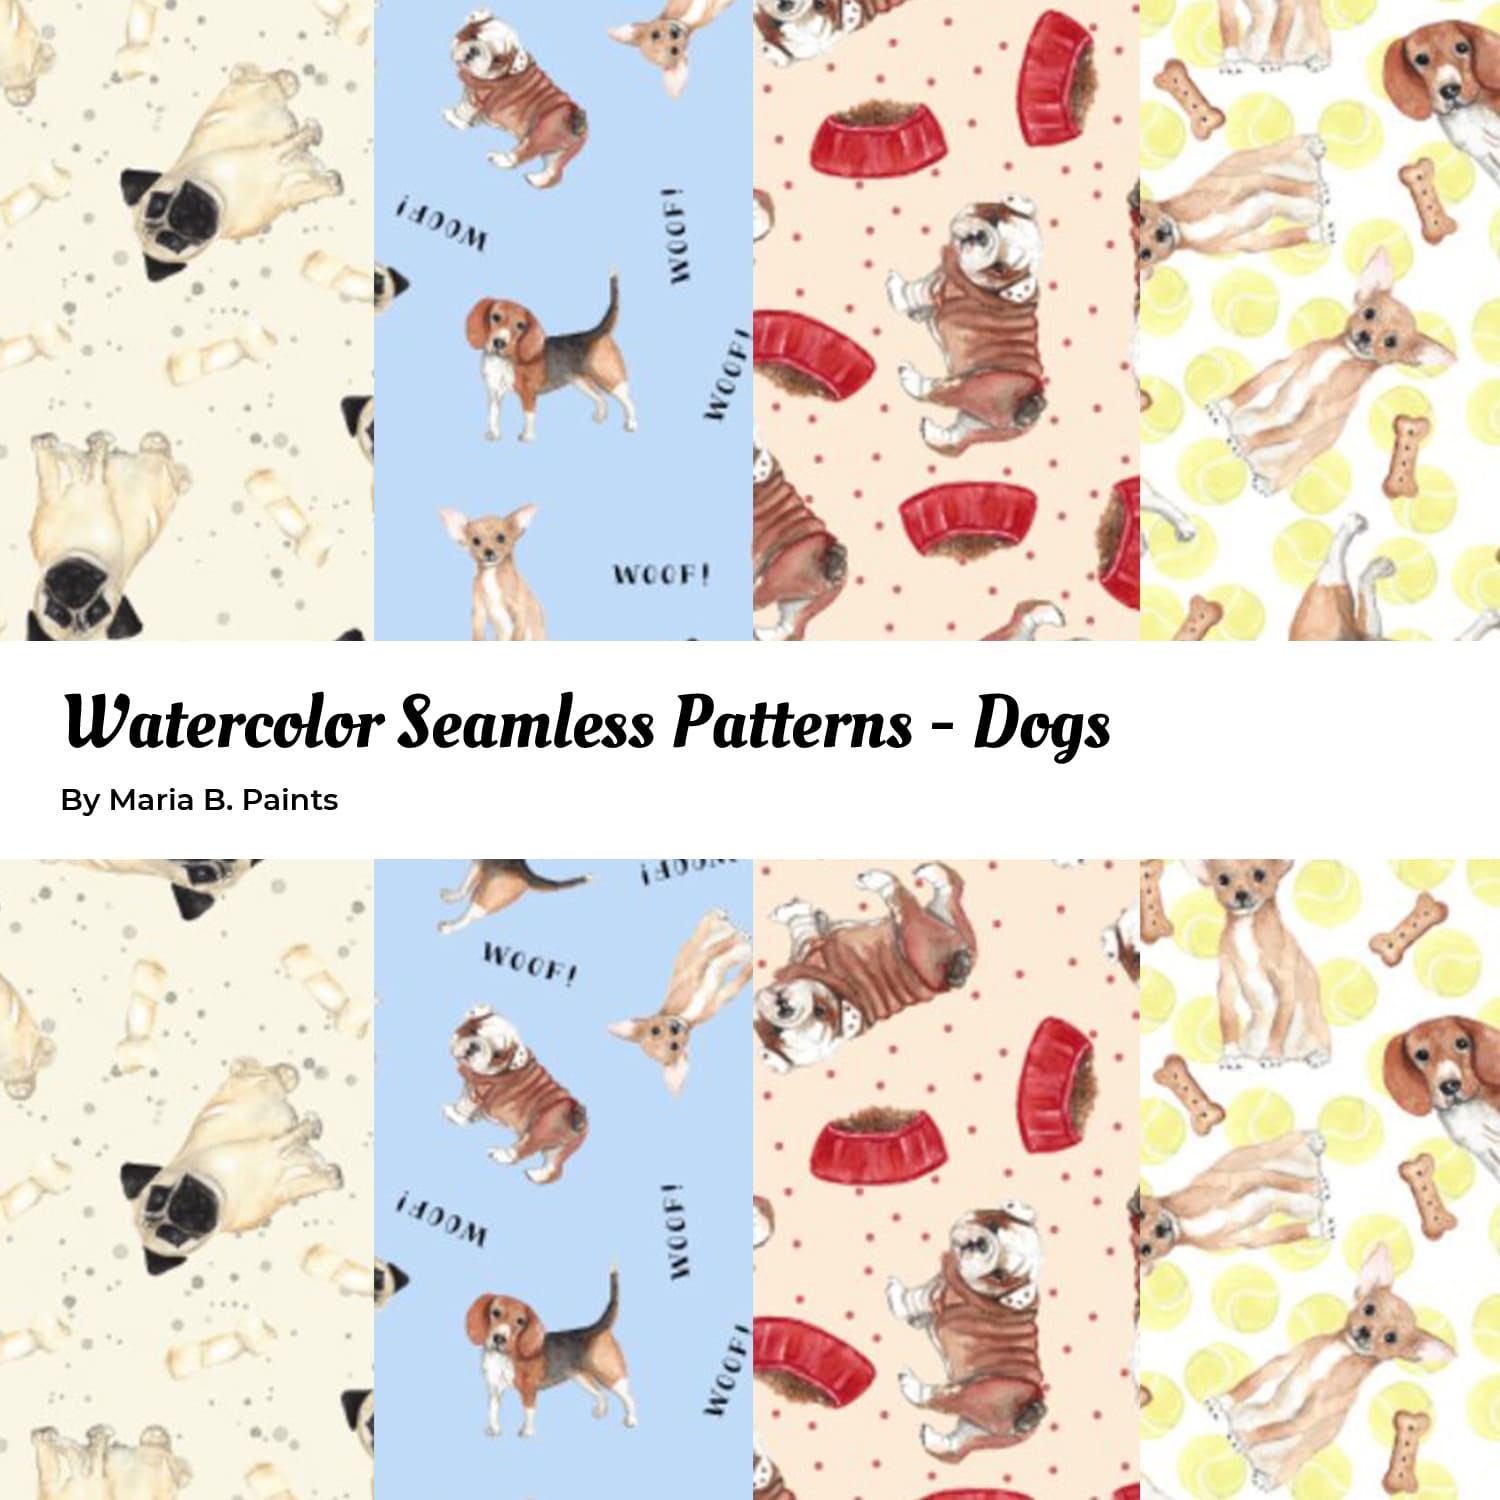 Watercolor Seamless Patterns - Dogs.